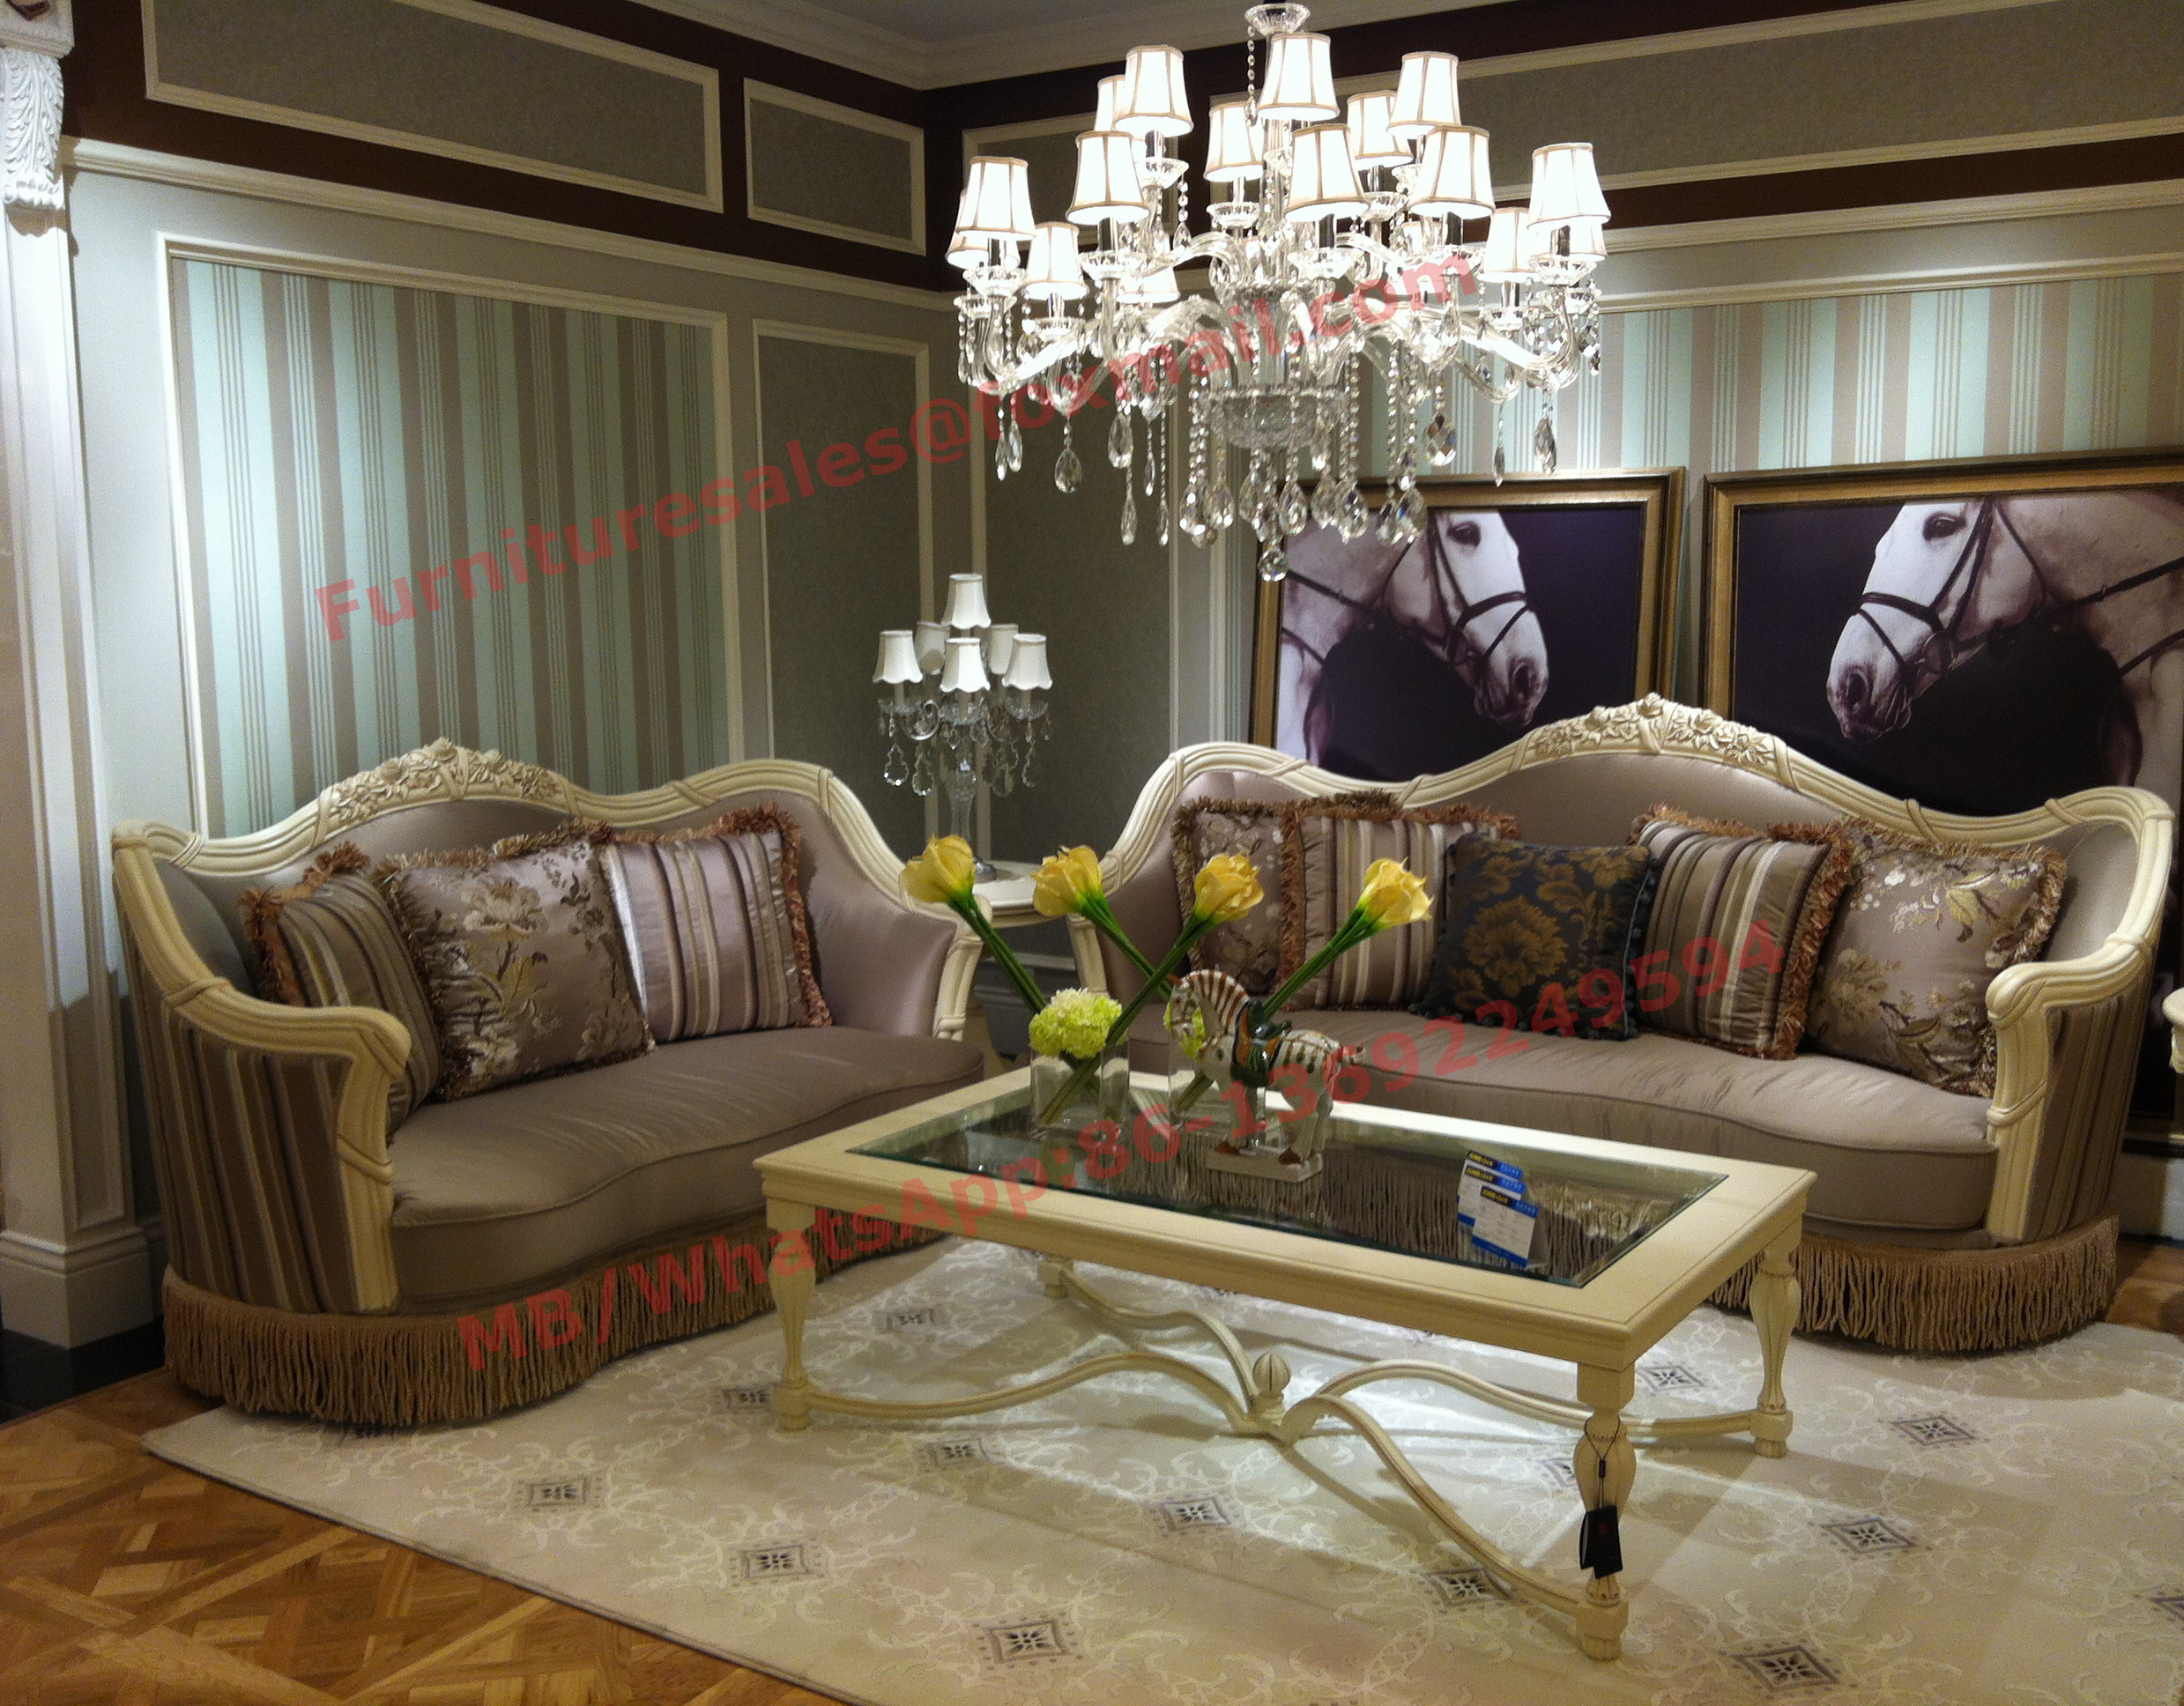  Luxury Design and Romantic Sofa set made by Wooden Carving Frame with Fabric Upholstery Manufactures